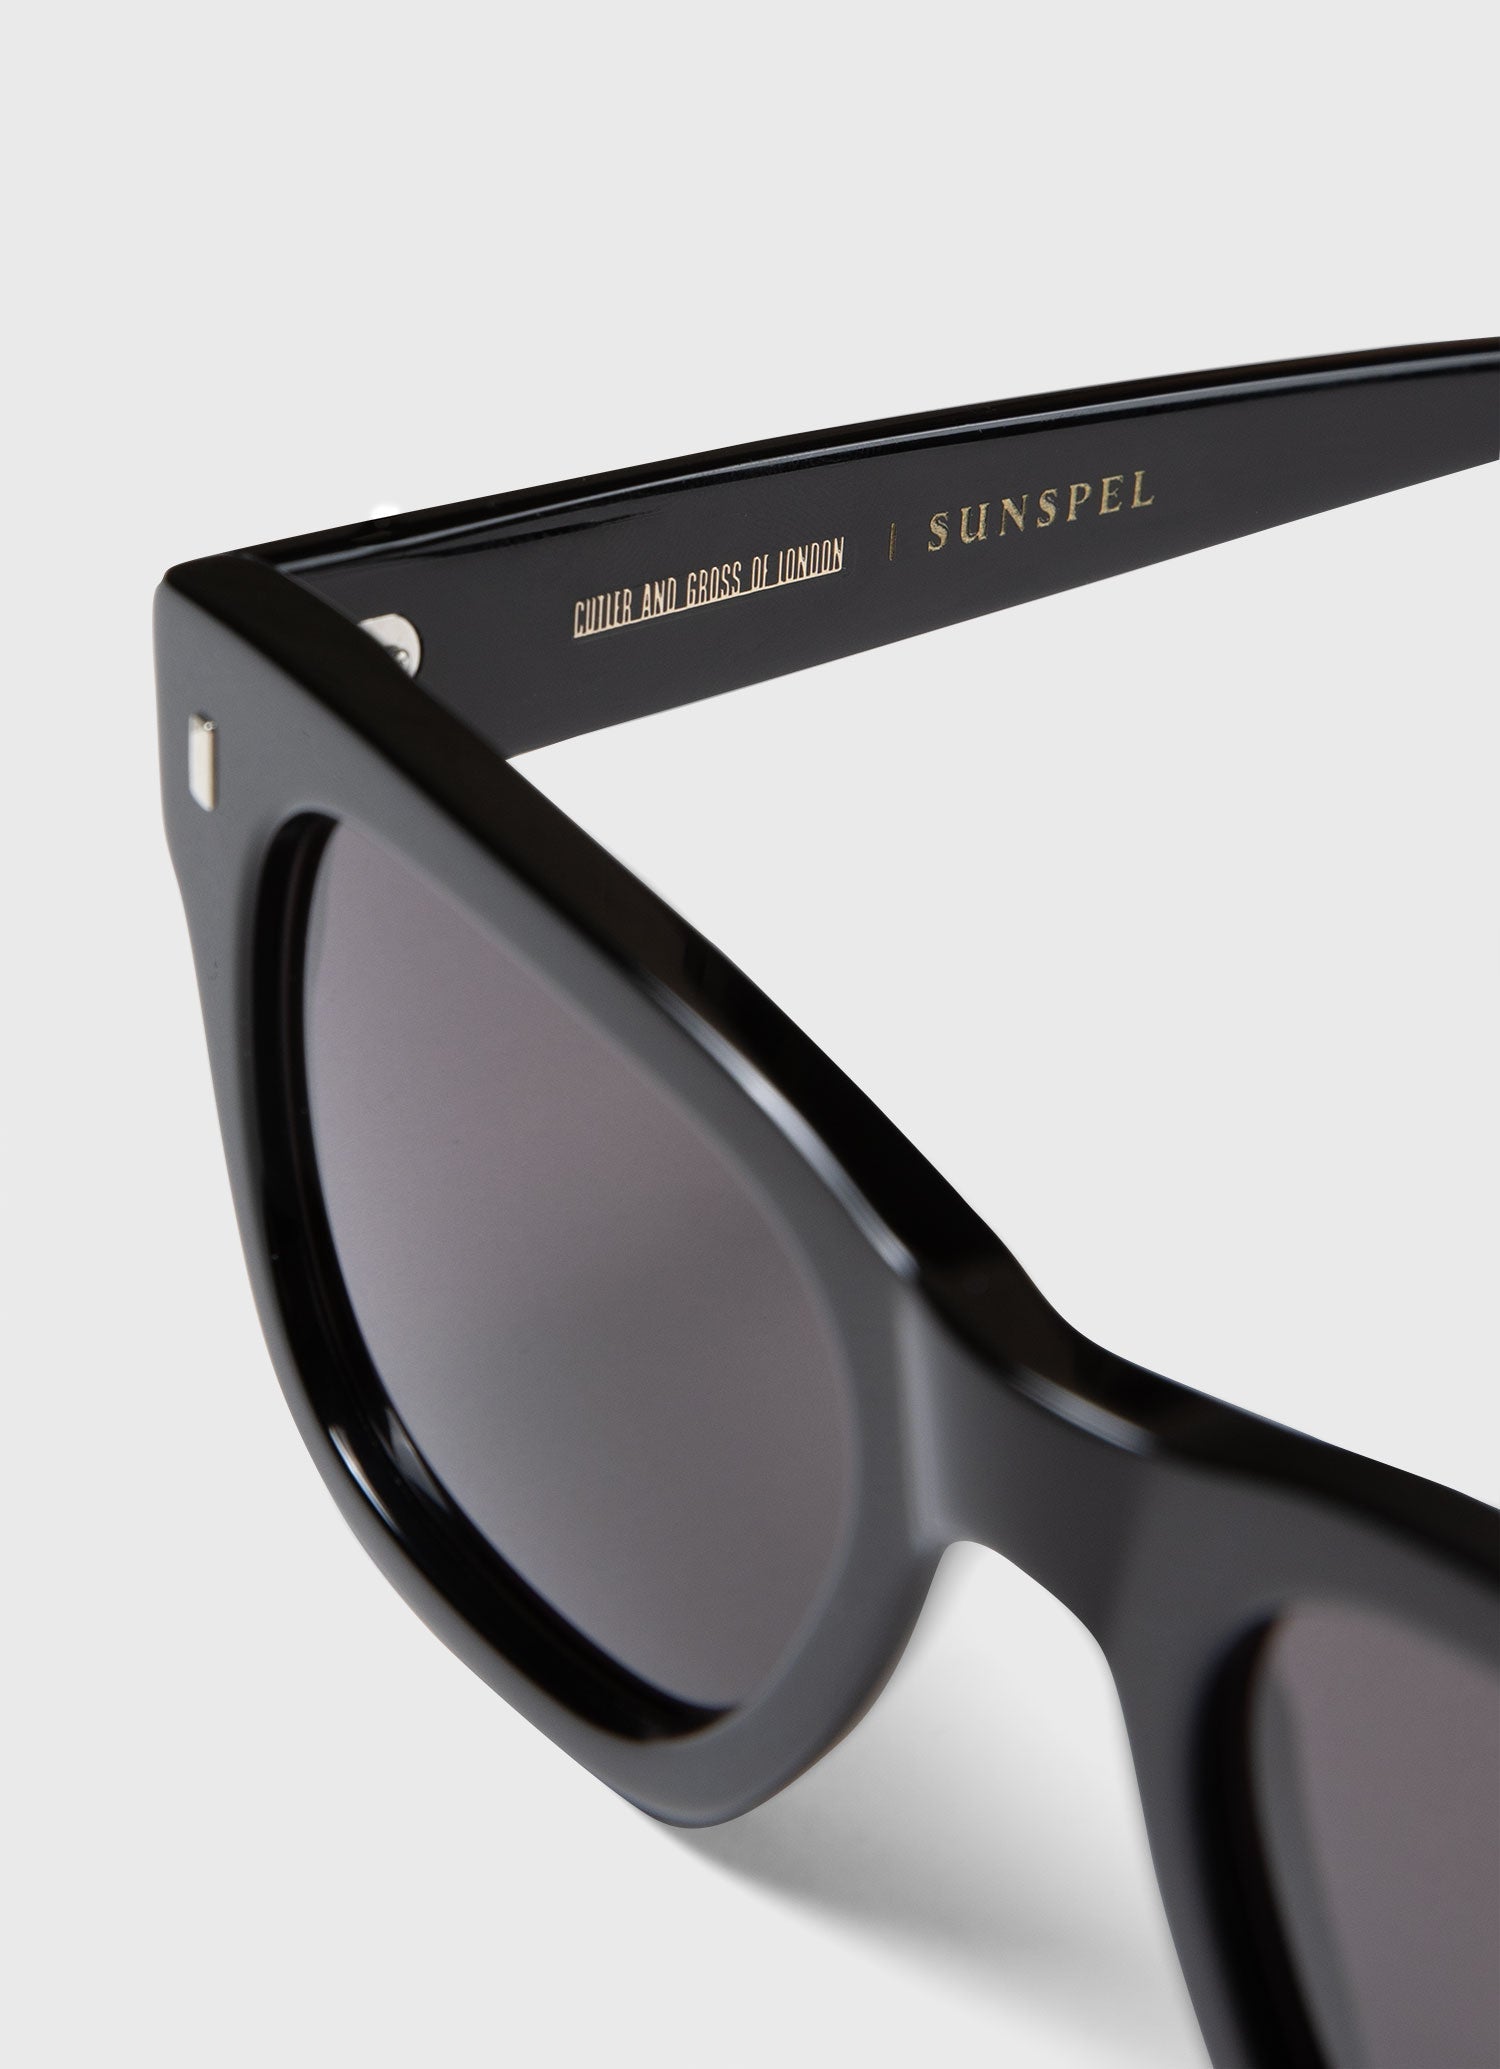 Cutler and Gross Sunglasses in Black